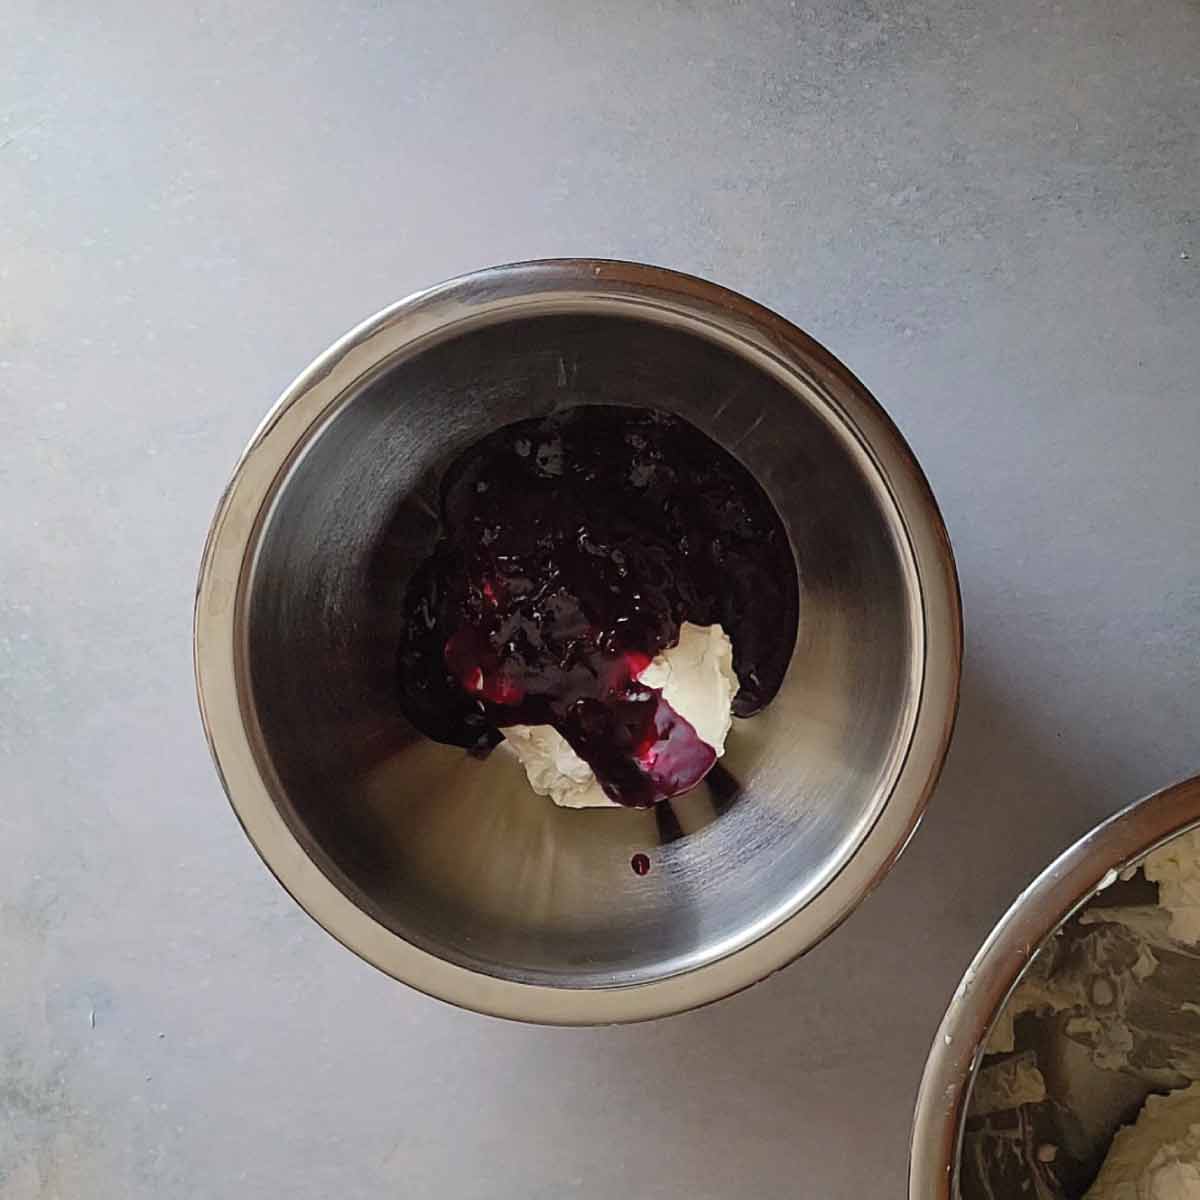 Blueberry sauce poured over 1 cup of filling ready to mix together in a mixing bowl.